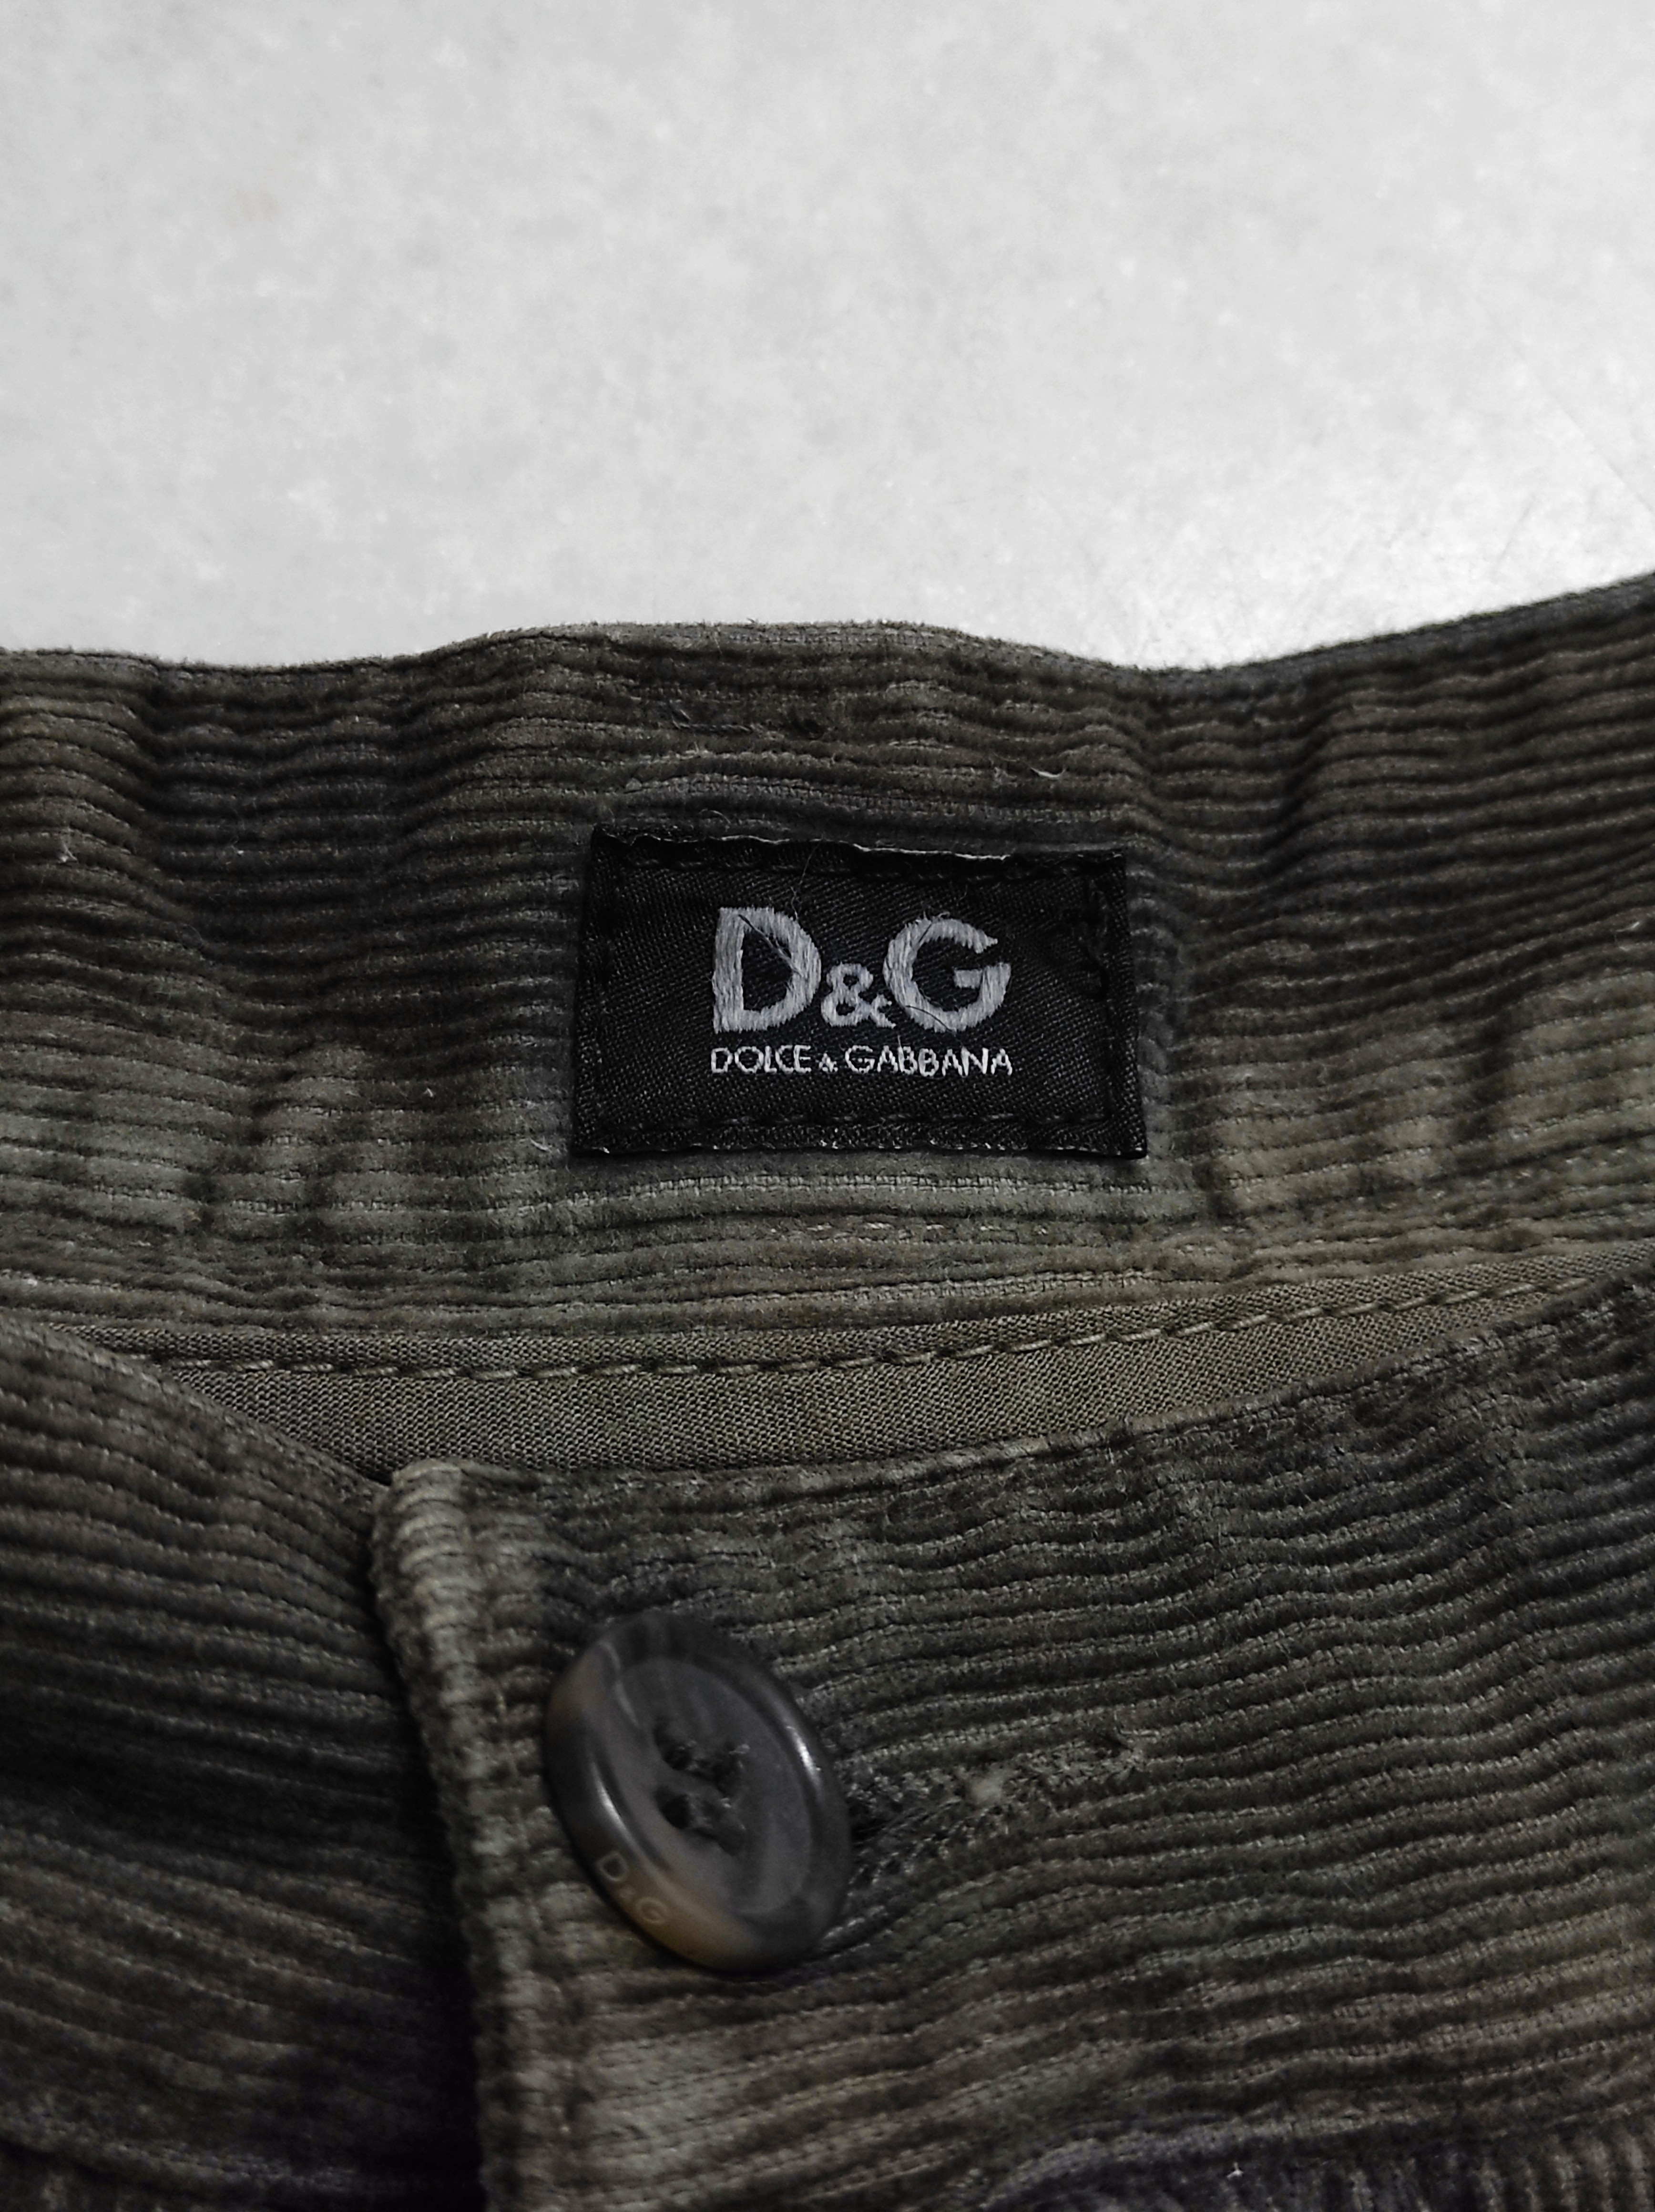 AW2003 Dolce and Gabbana pocket cargo military pants - 3